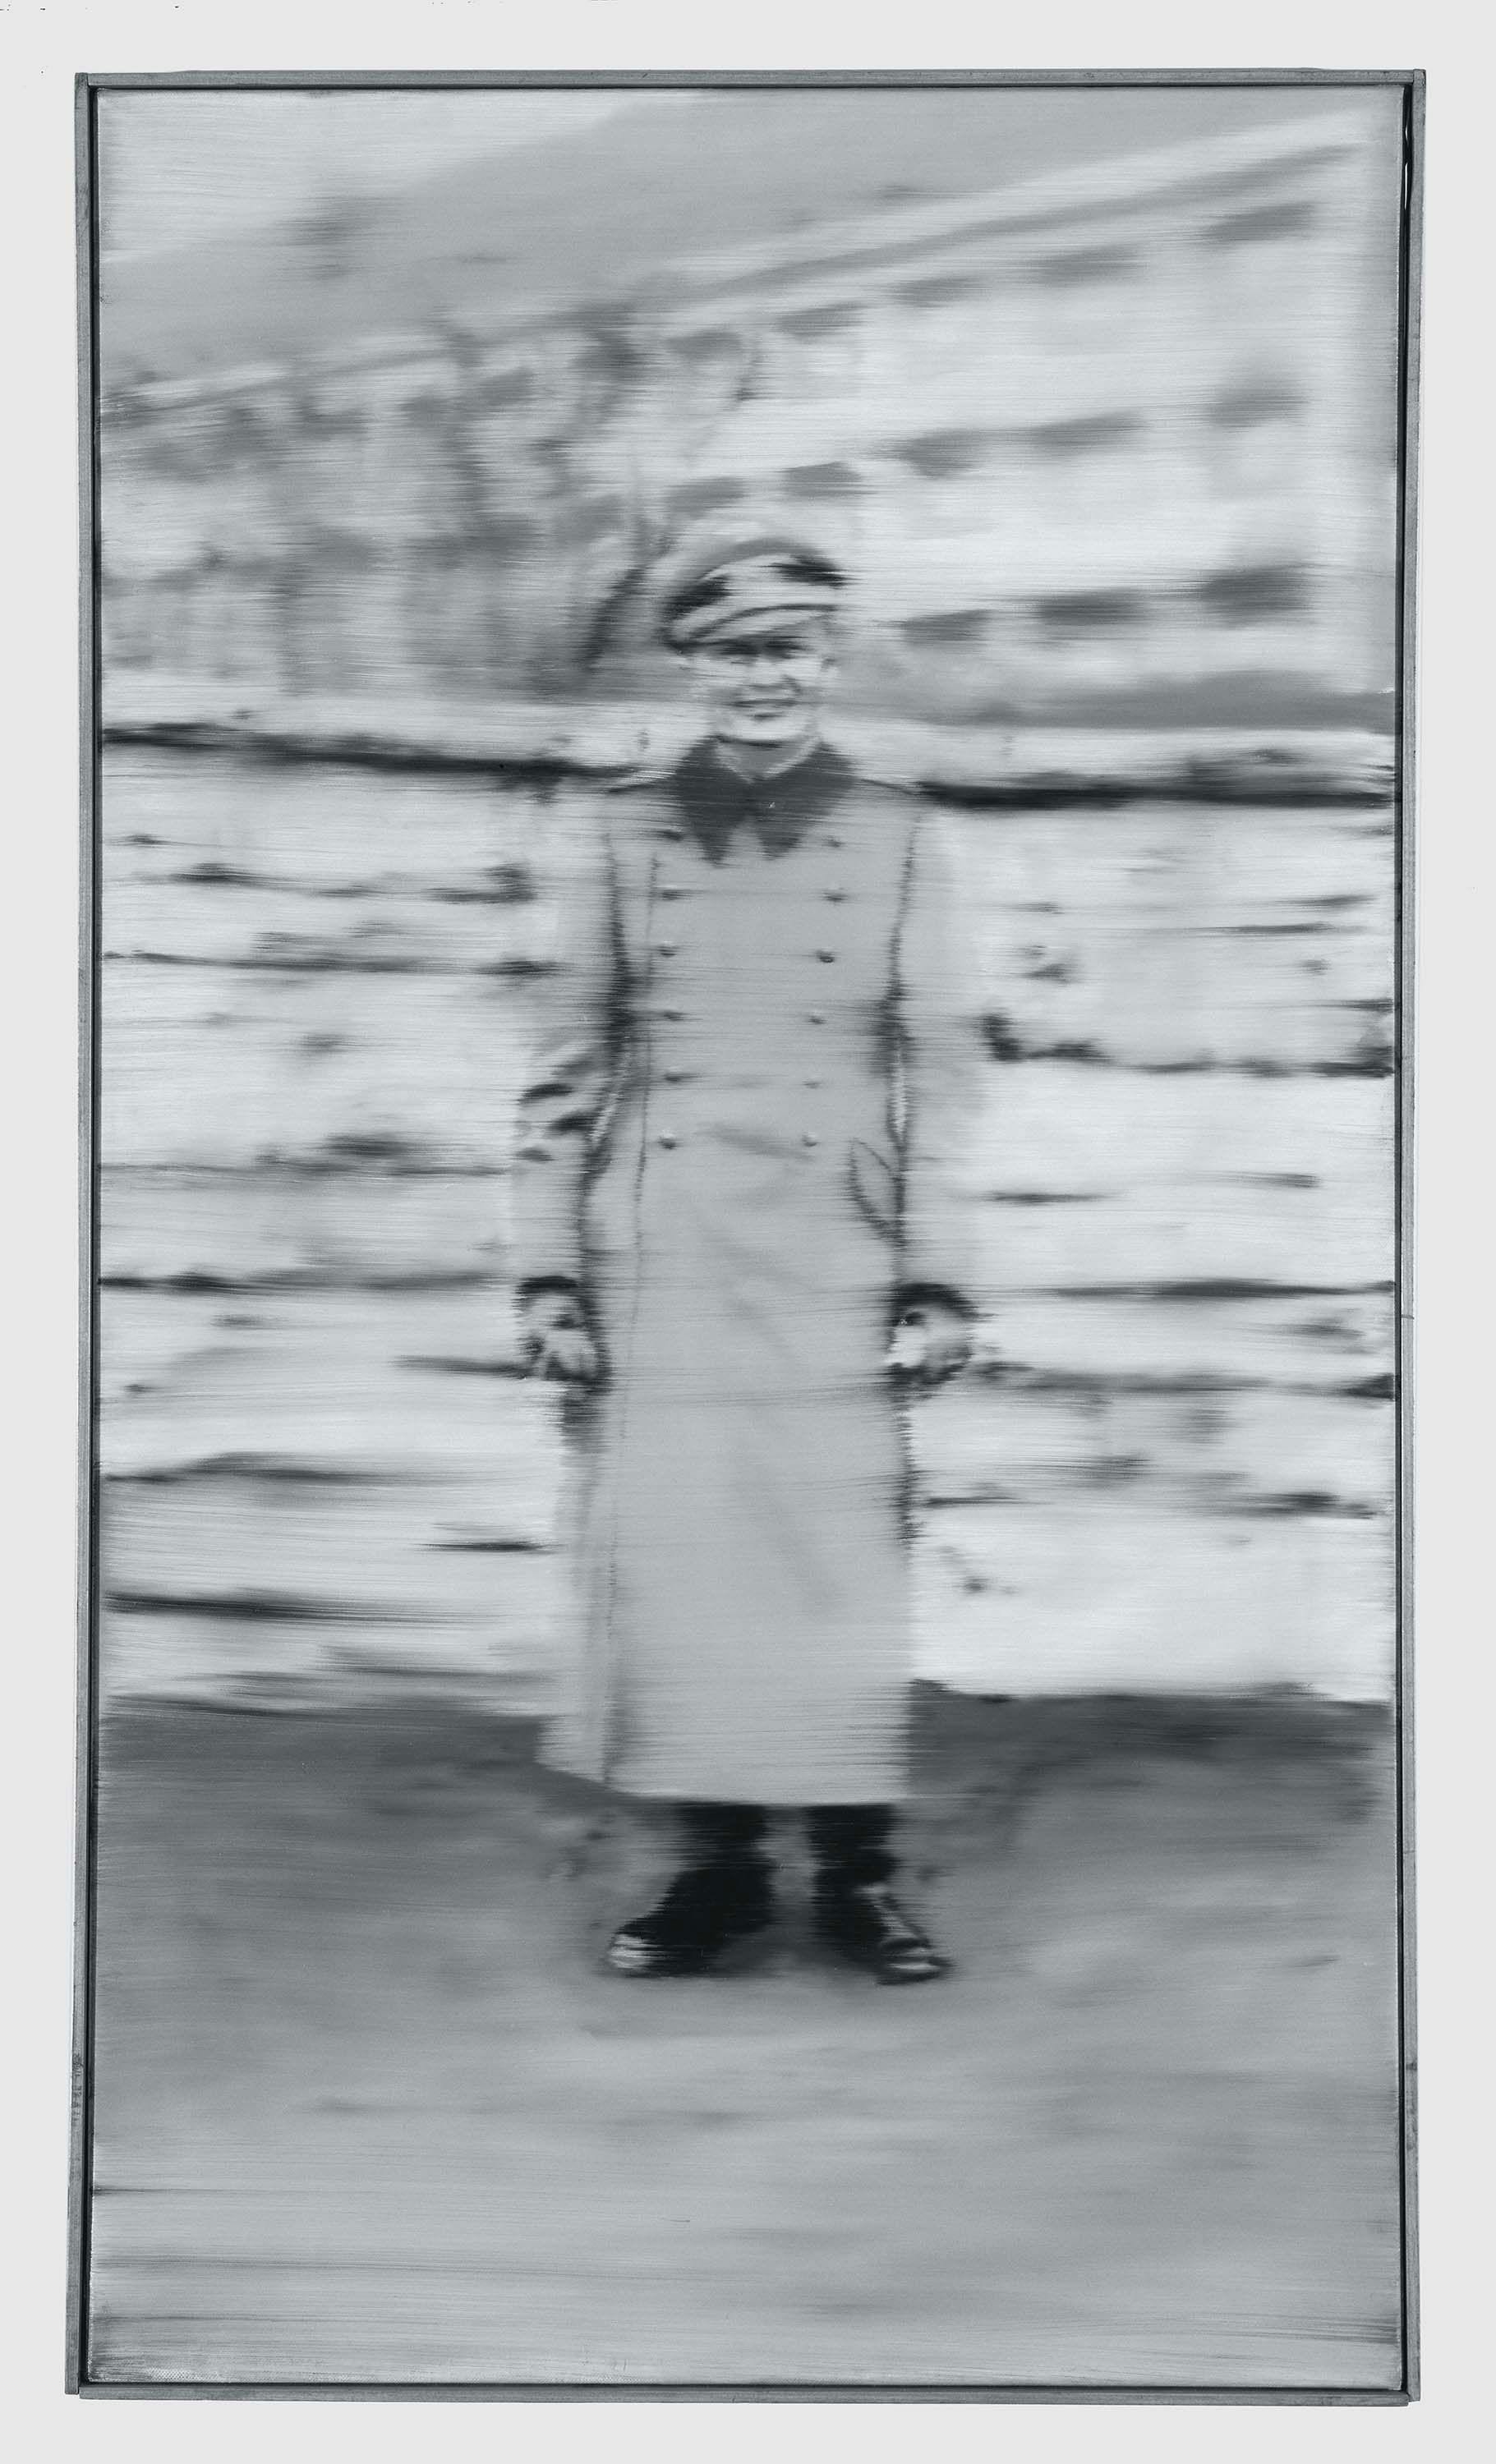 A painting by Gerhard Richter, titled Onkel Rudi (Uncle Rudi), dated 1965.